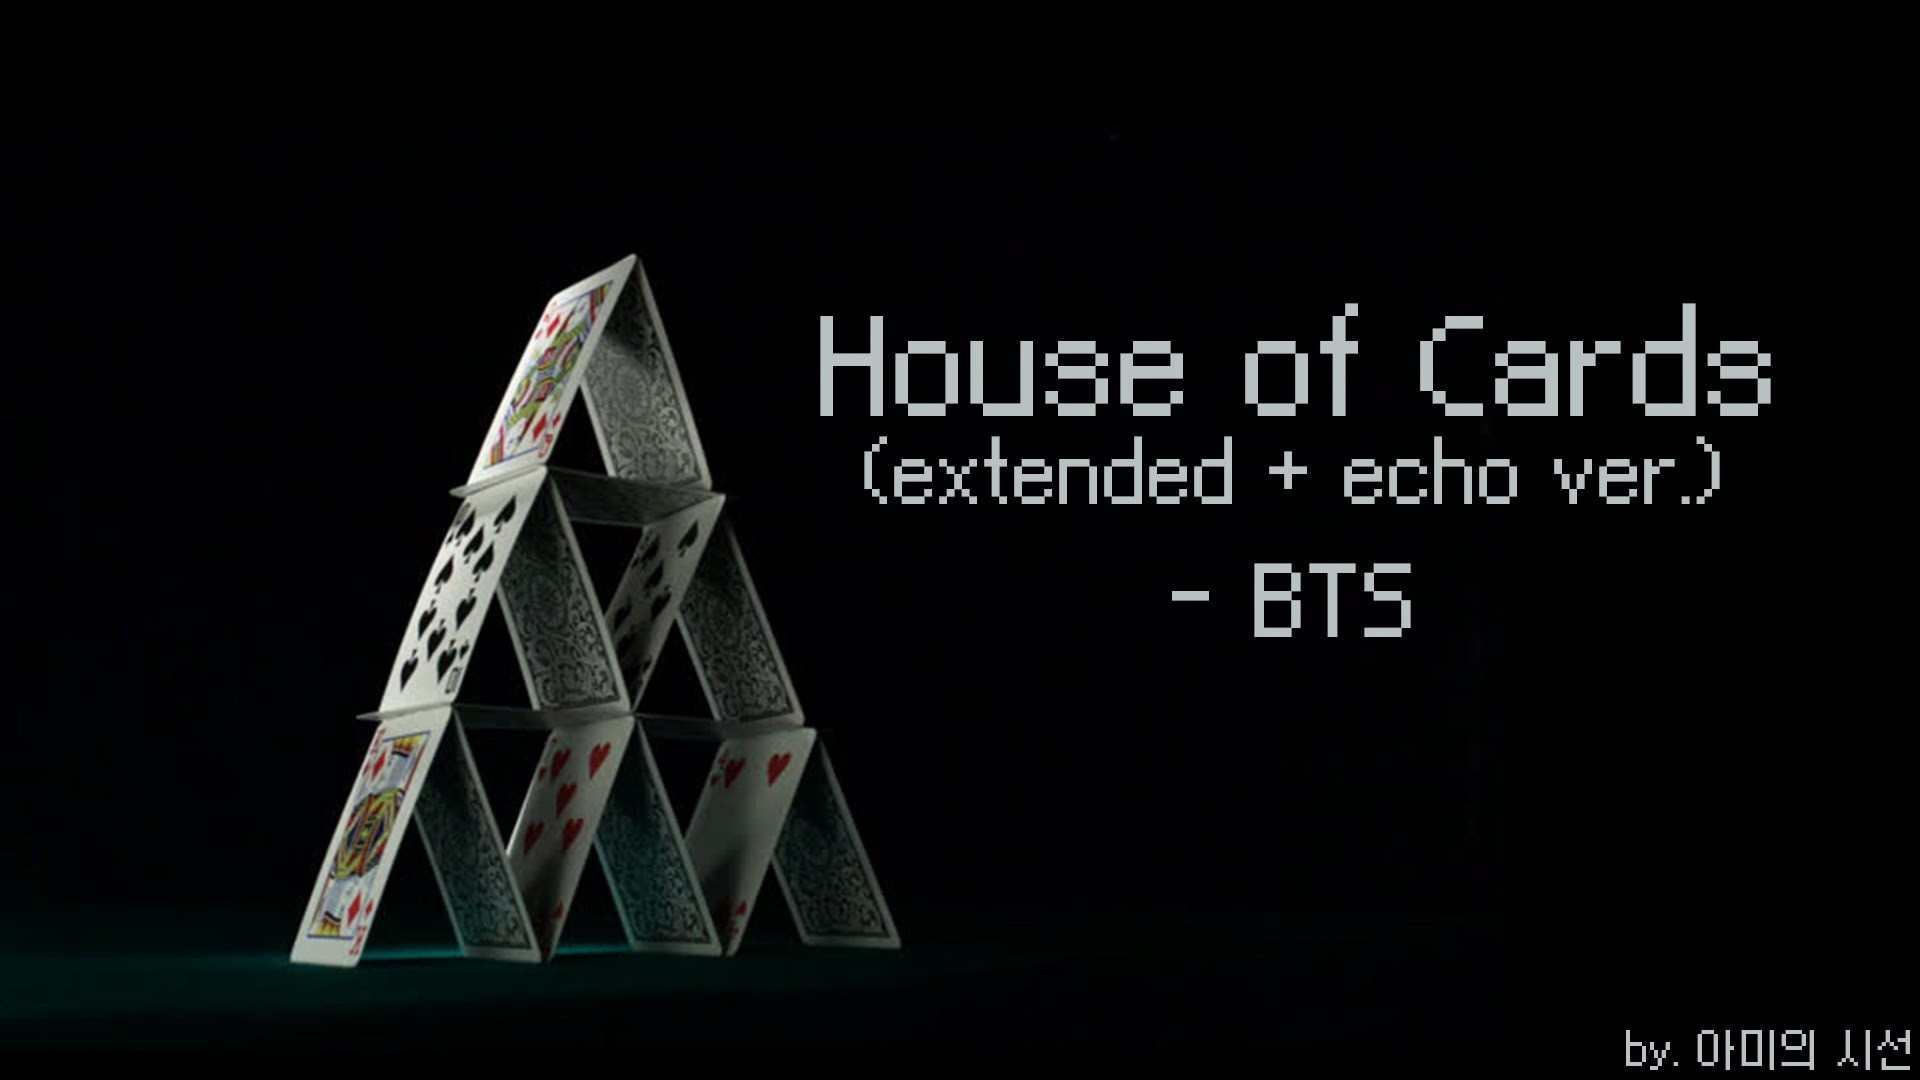 BTS / Remix BTS – House Of Cards Extended with Echo Ver.